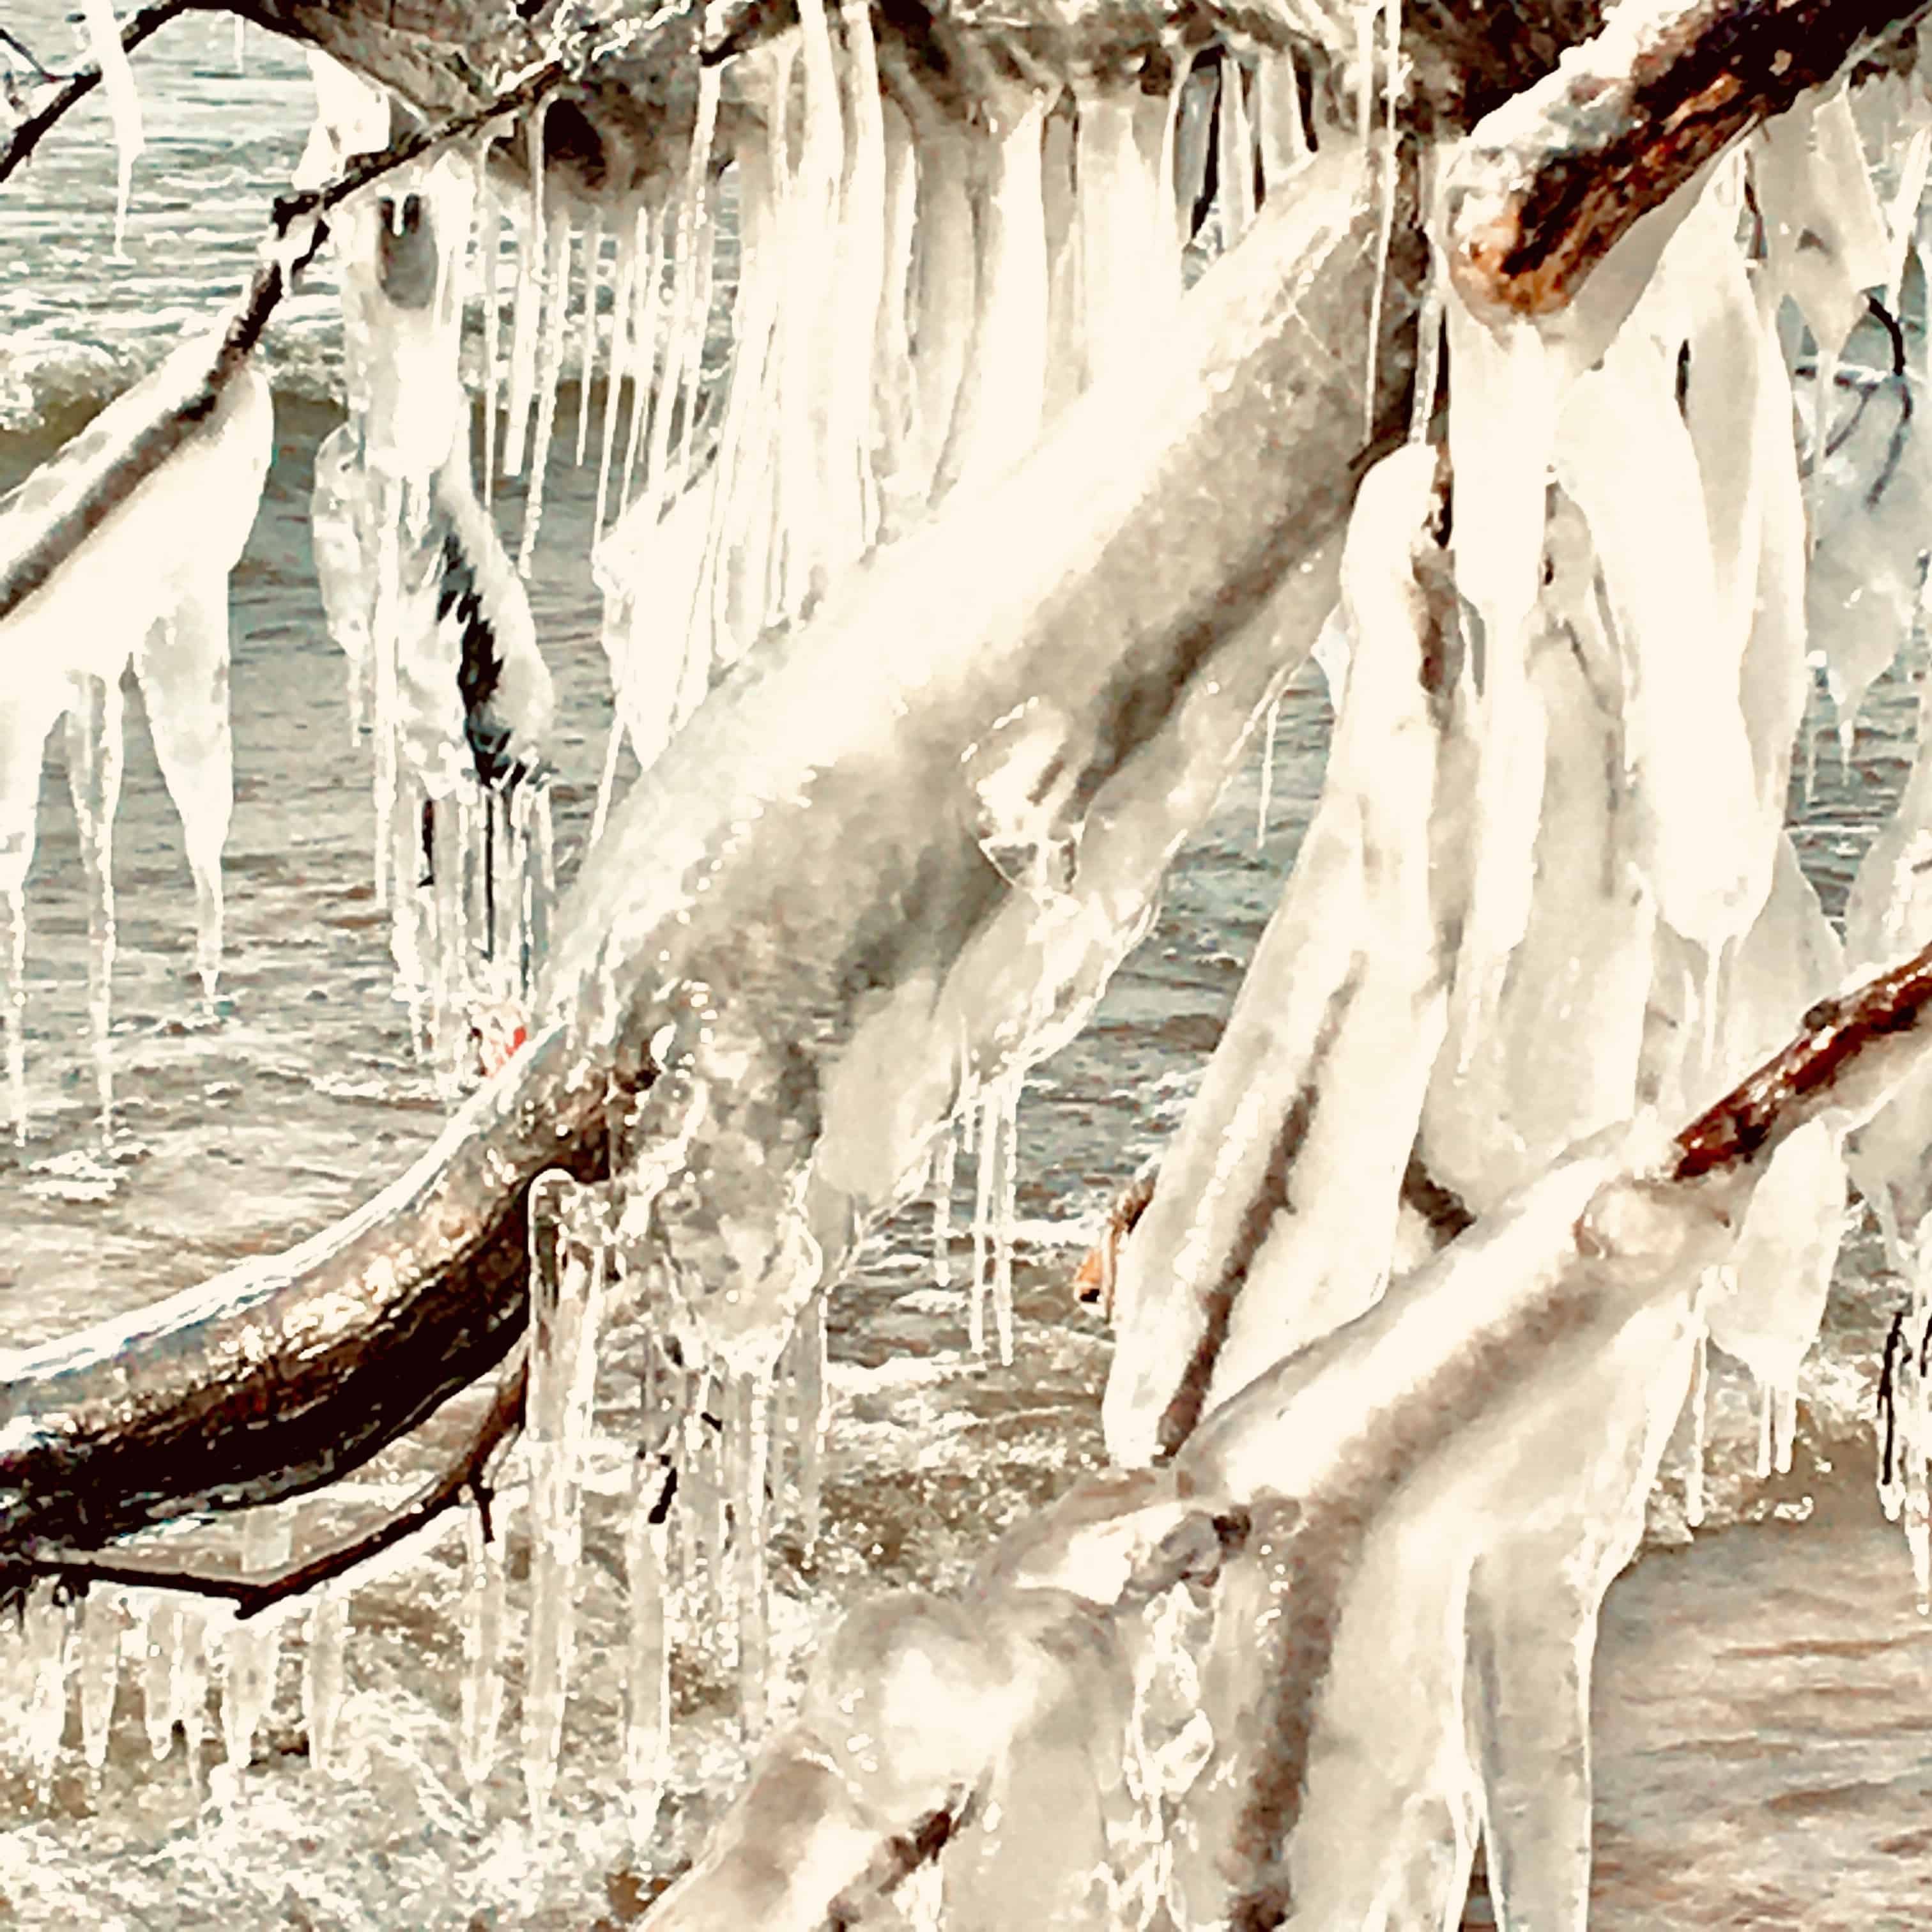 picture of ice formations on fallen trees/belief in God